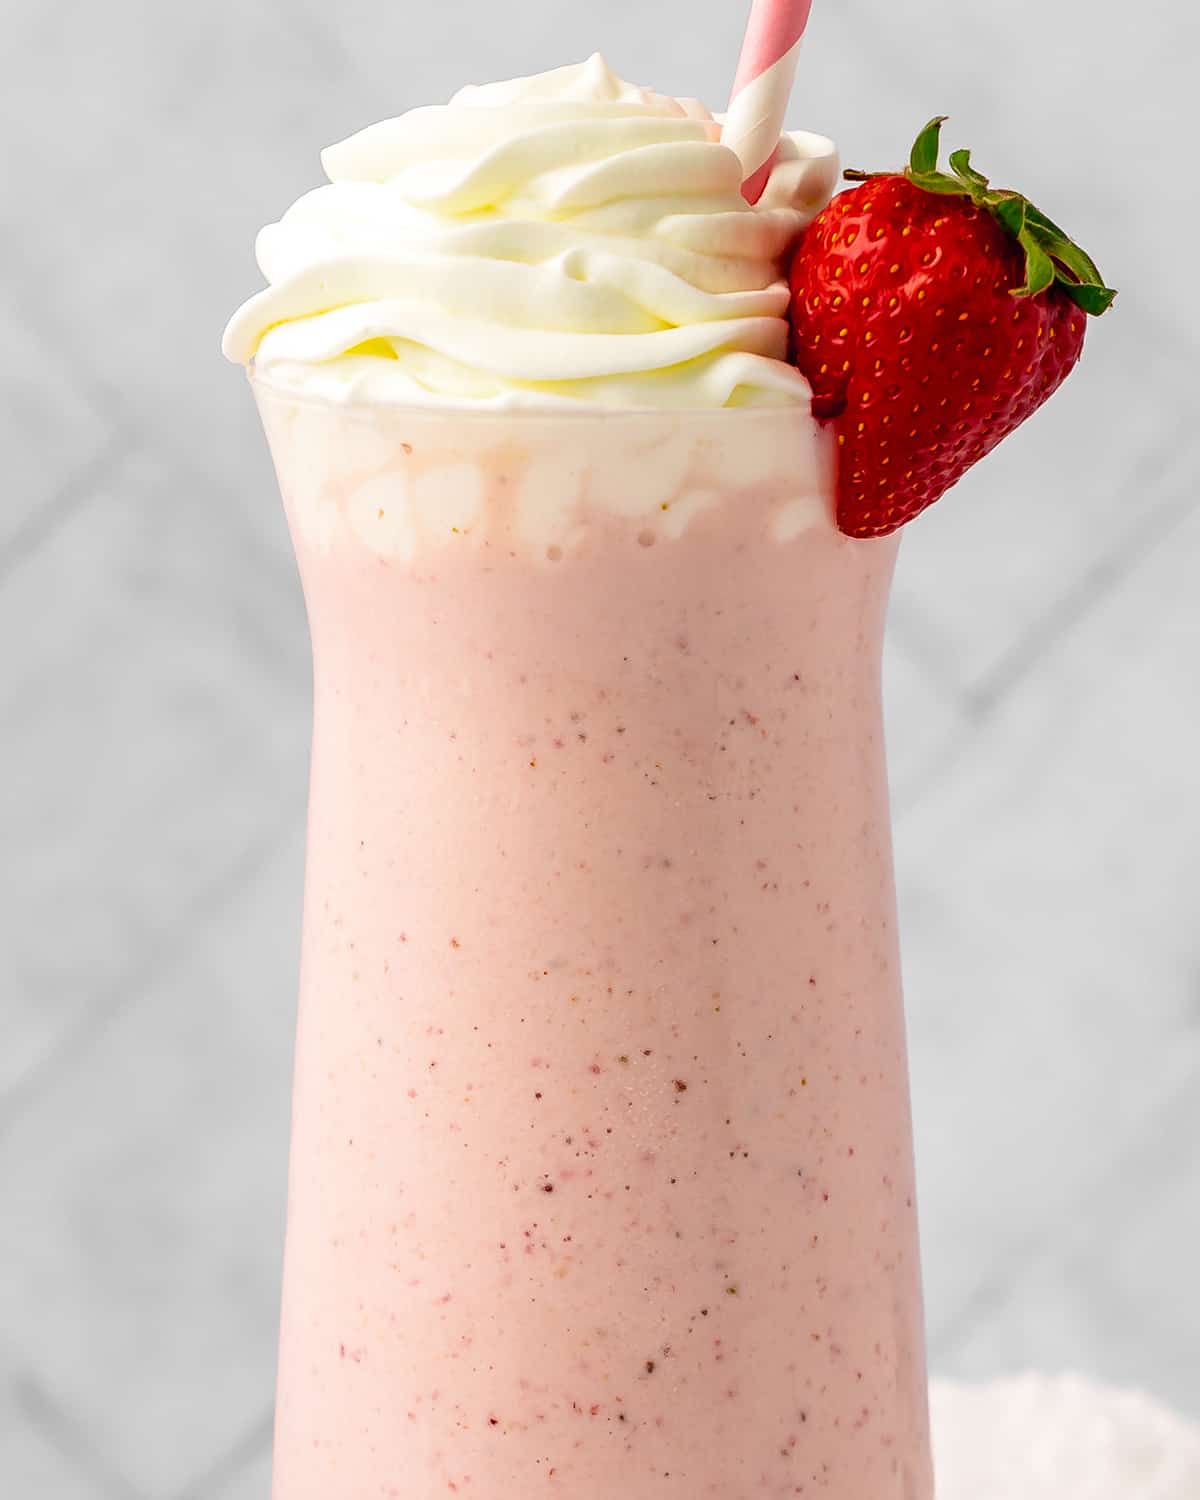 up close photo of Strawberry Milkshake in a glass with whipped cream and a strawberry